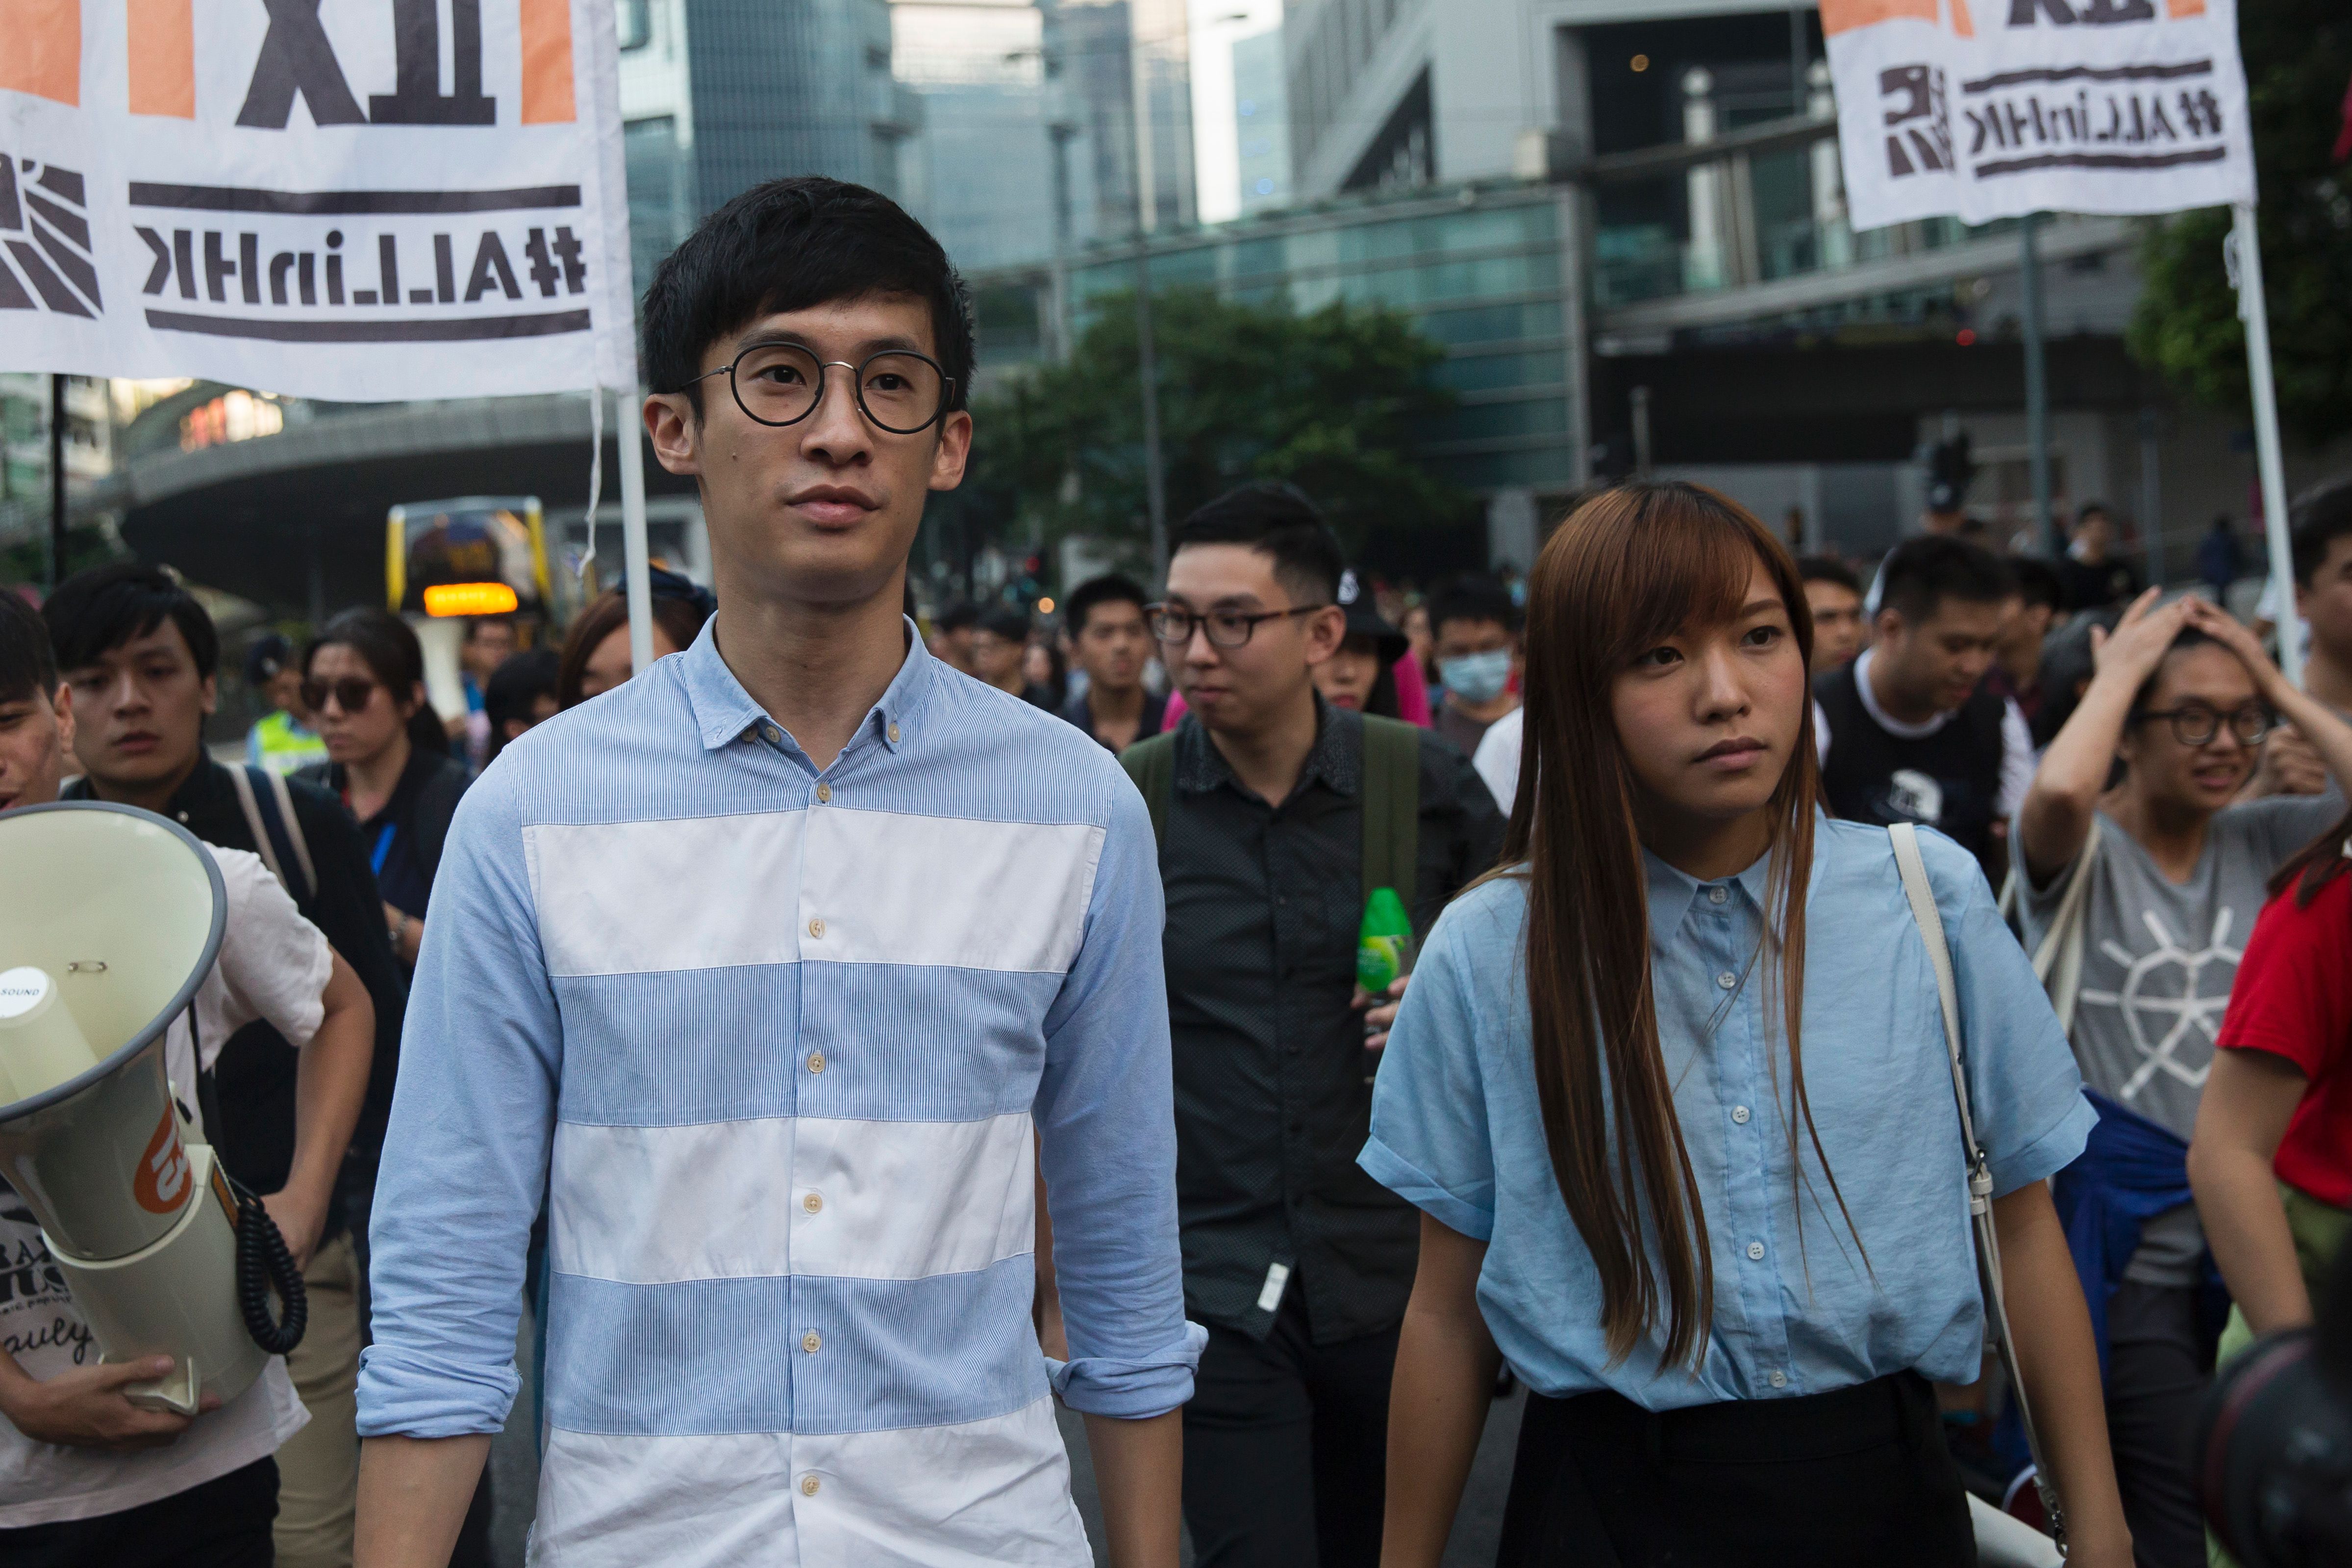 Sixtus "Baggio" Leung, left, and Yau Wai-ching, right, march during a protest in Hong Kong on Nov. 6, 2016 (Isaac Lawrence—AFP/Getty Images)